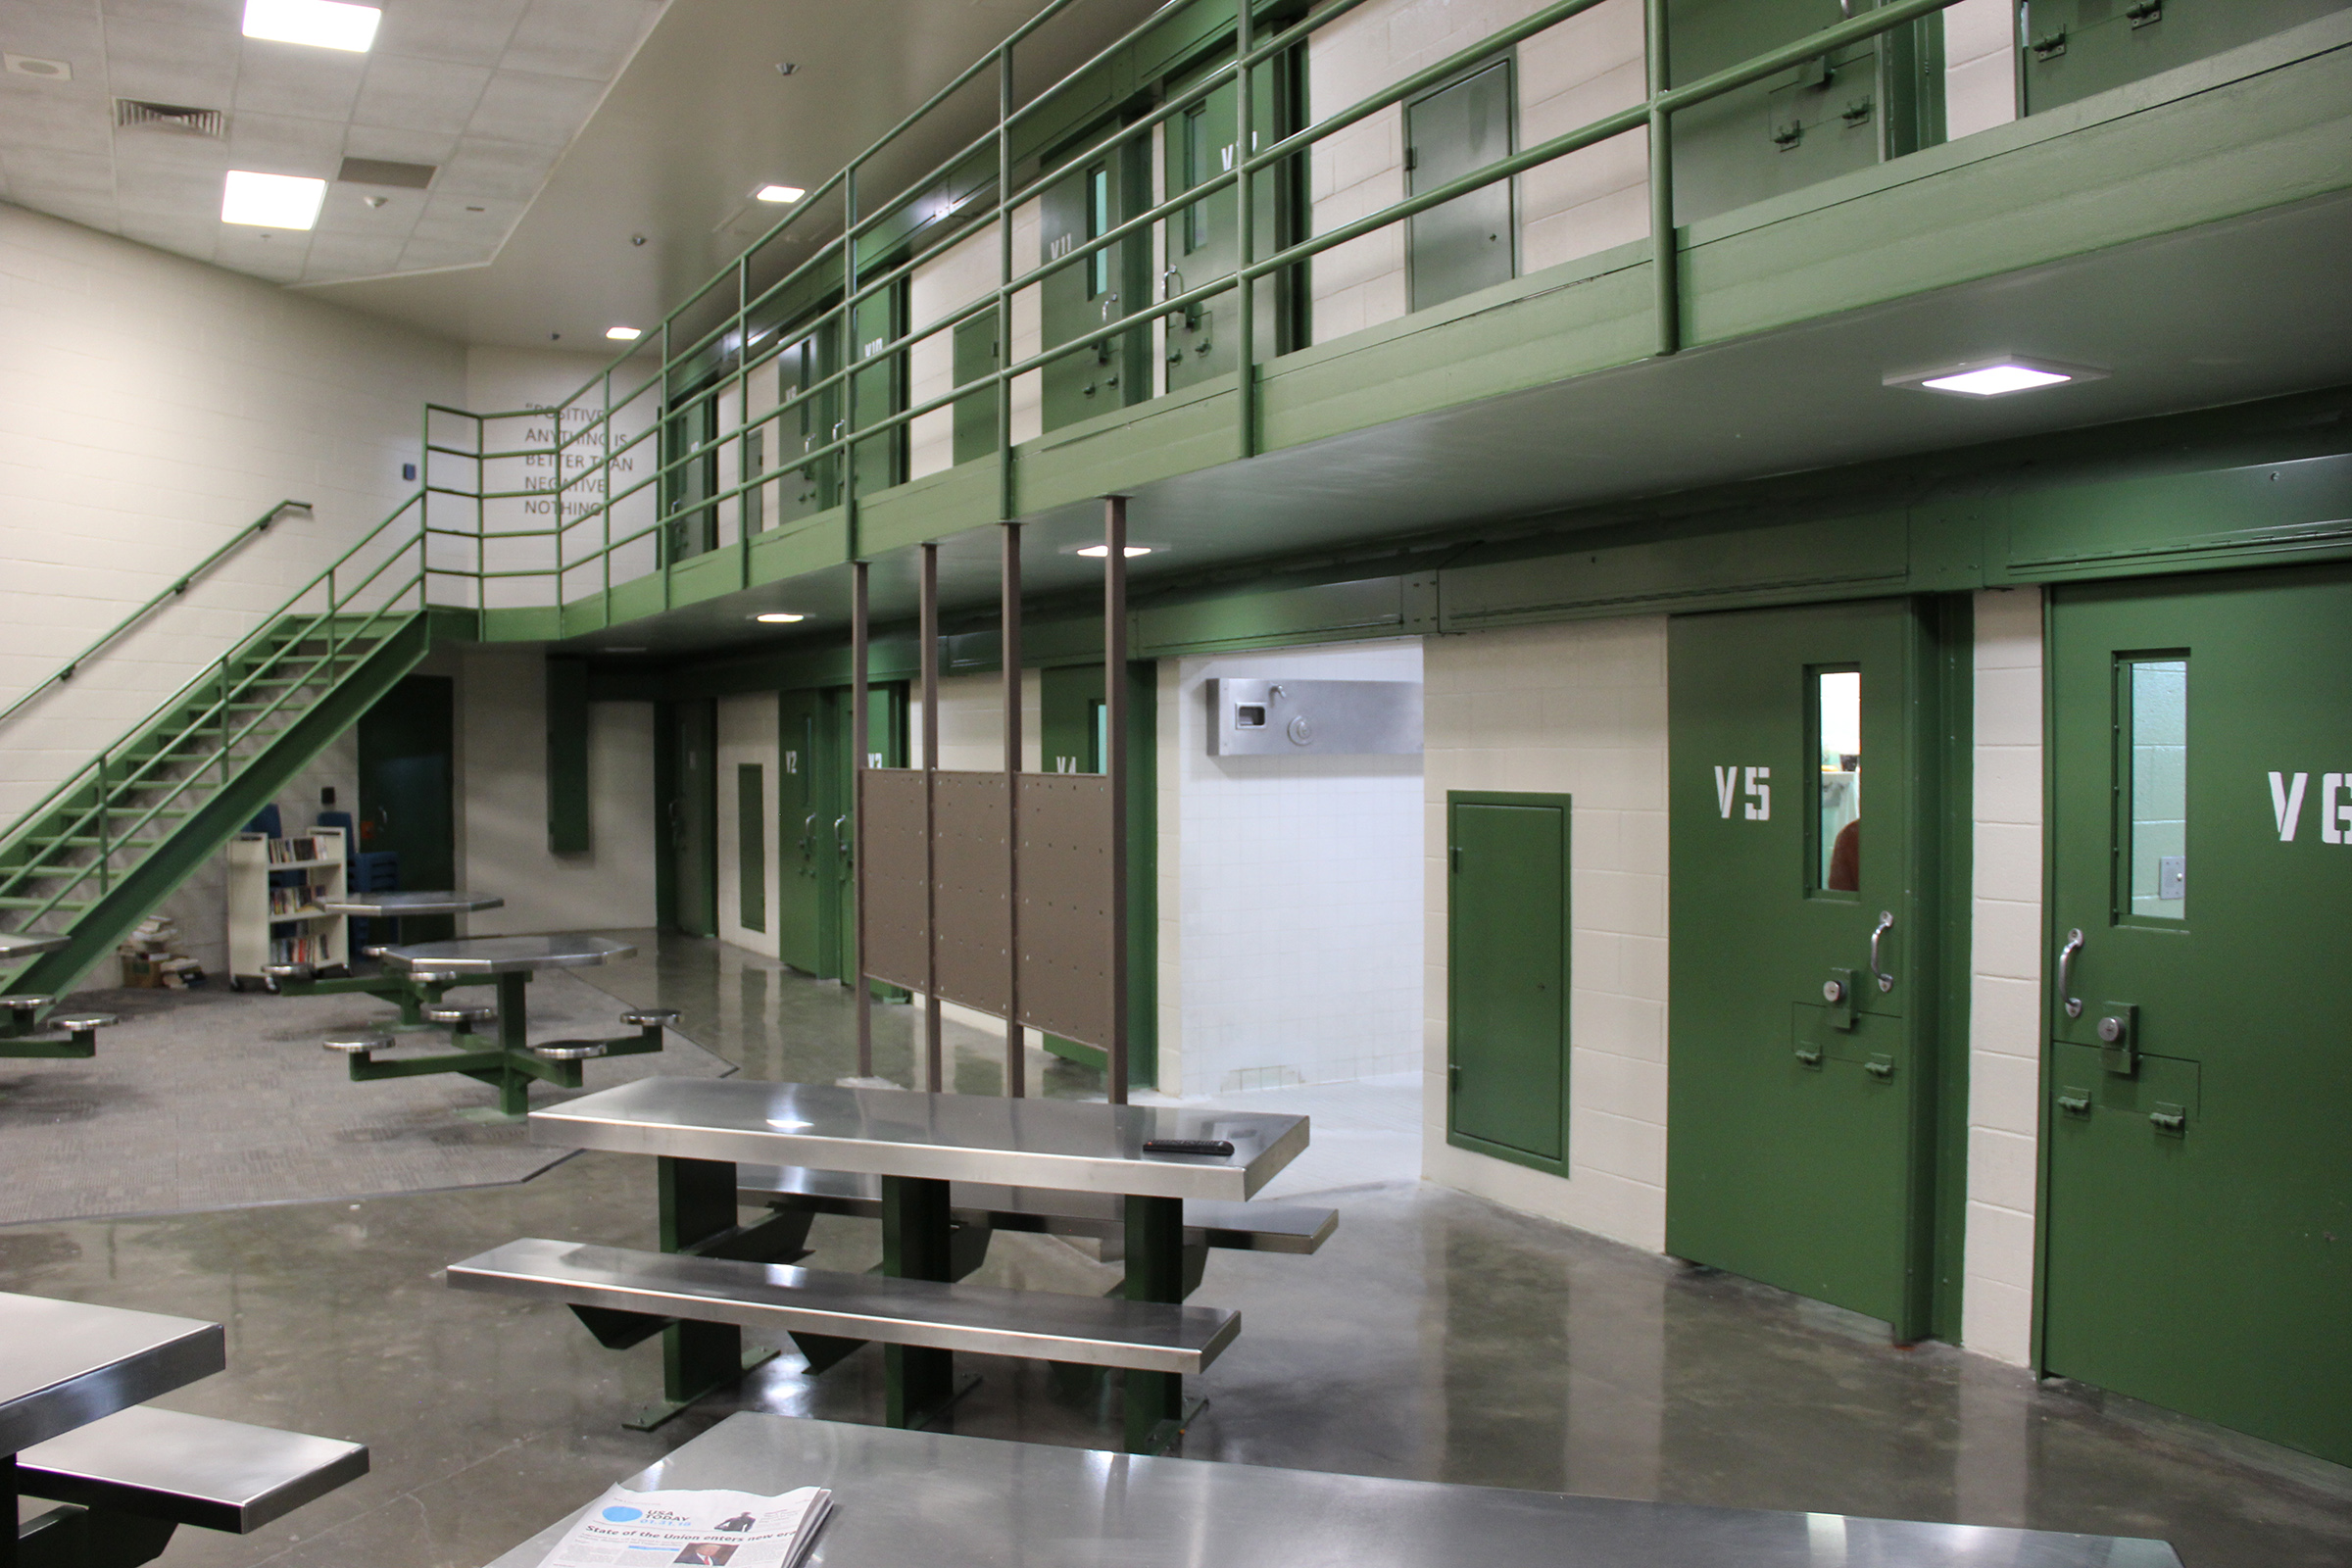 County jail employee dies; 2nd staff member positive for COVID19 The